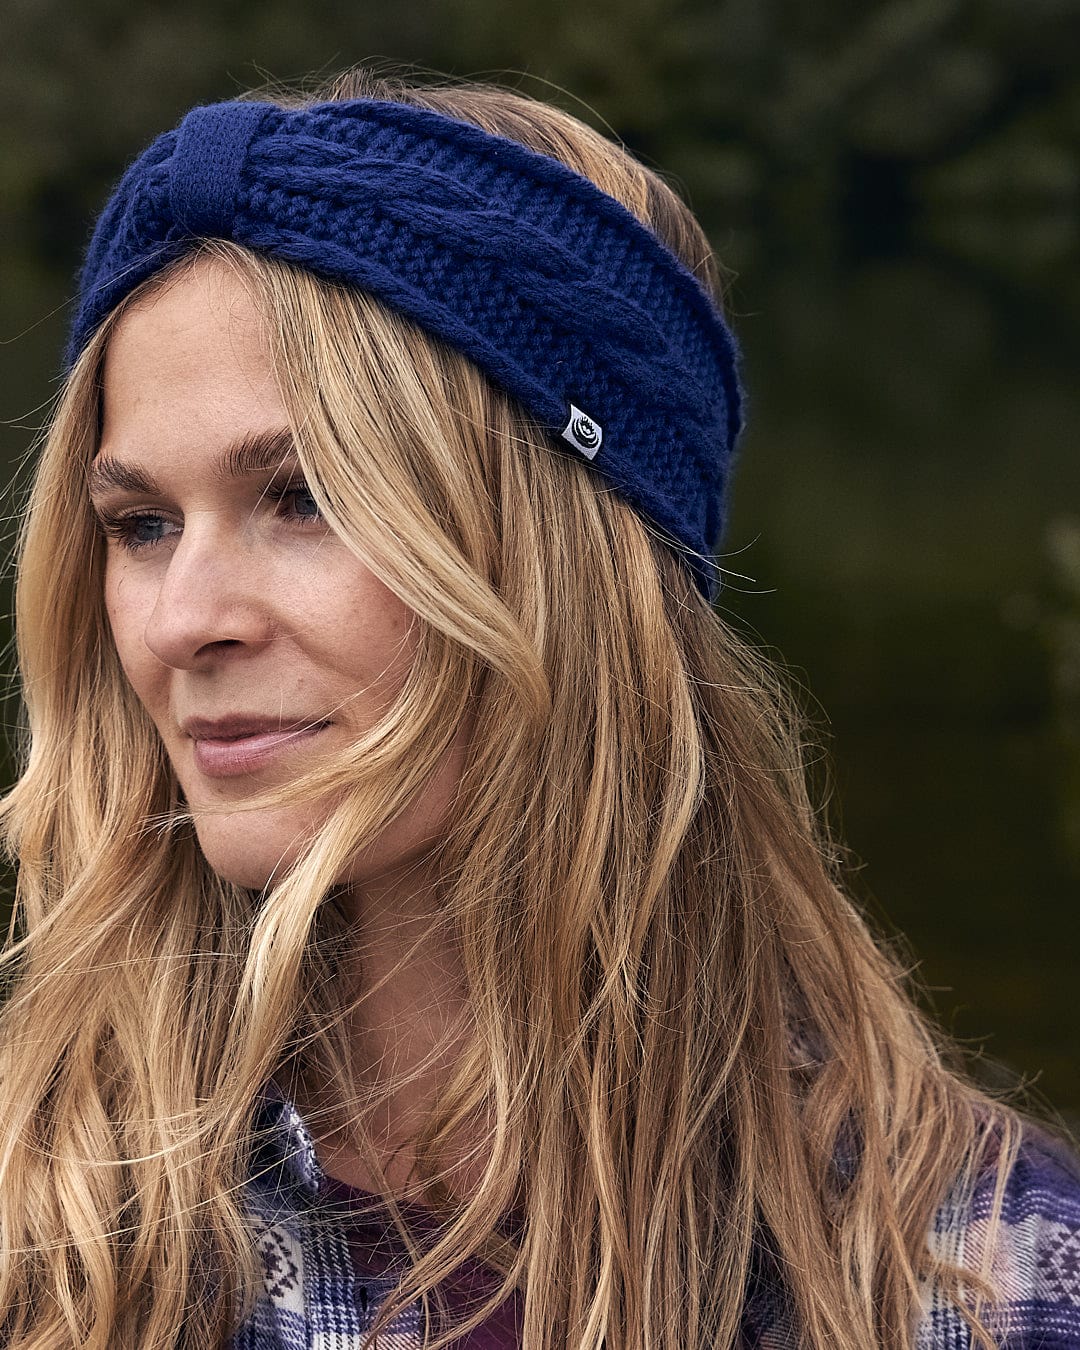 A fashion-forward woman donning a cozy Saltrock Cable - Knitted Headband - Blue, showcasing her warmth and style.